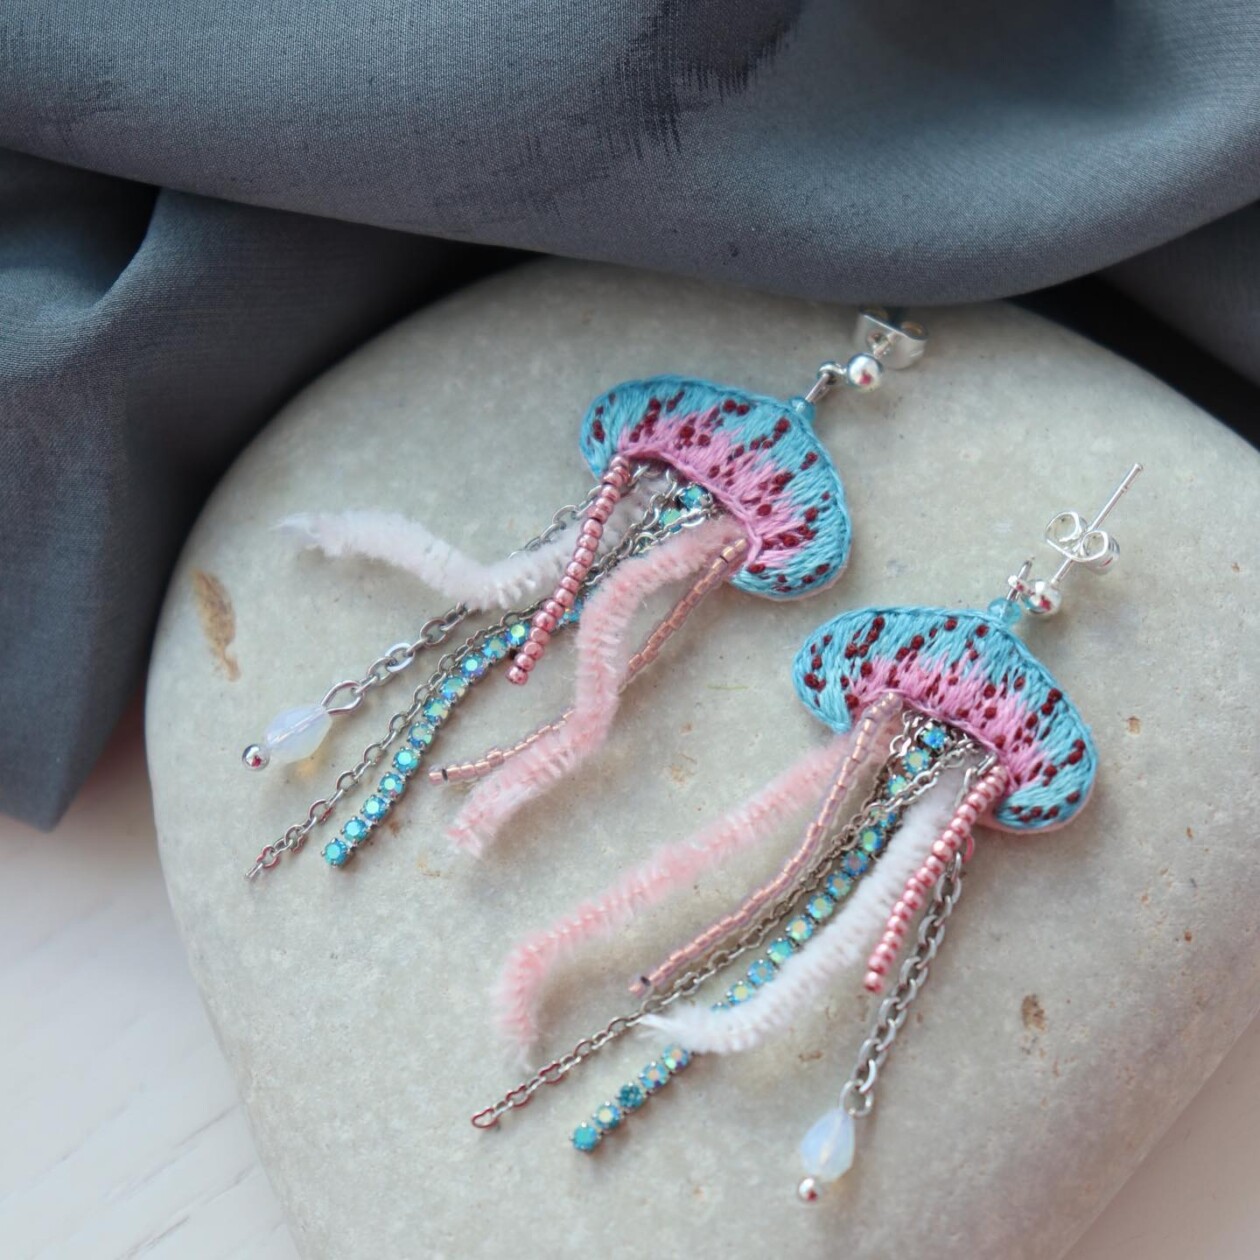 Eye Catching Handmade Embroidered Earrings By Vivaembr (1)